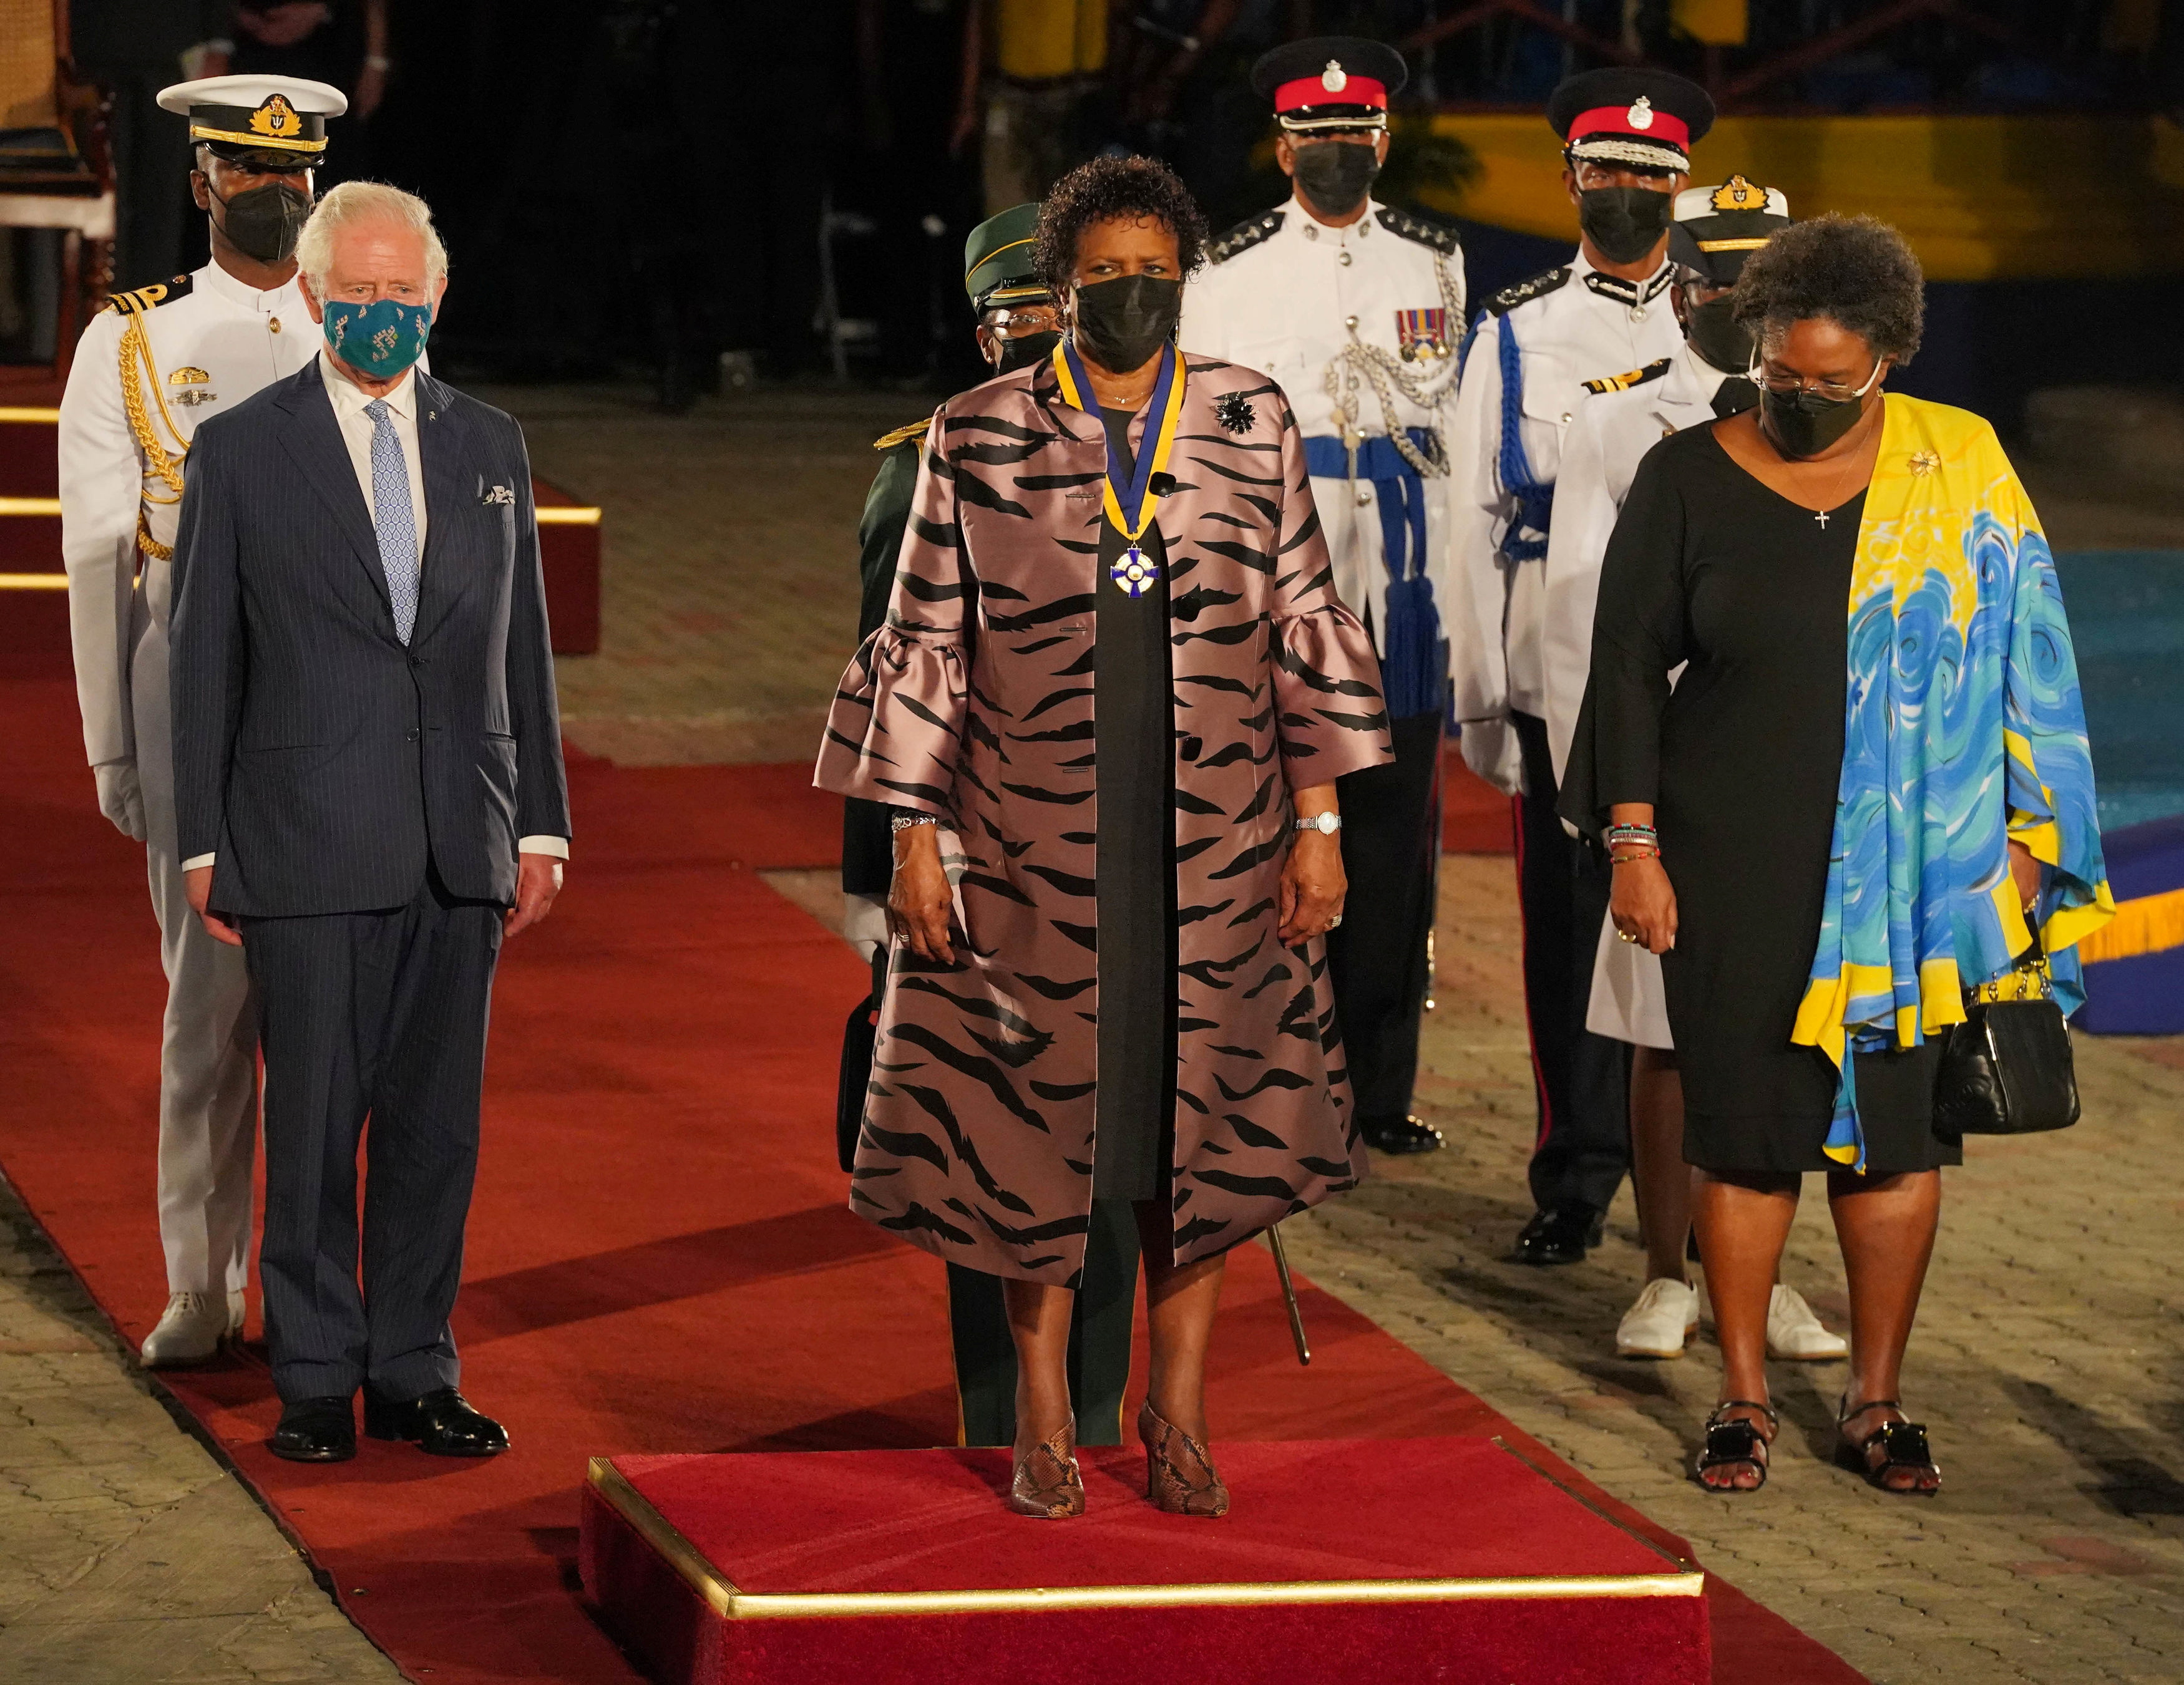 Britain's Prince Charles is joined by Barbados President Sandra Mason and Barbados Prime Minister Mia Mottley as they prepare to depart from the Presidential Inauguration Ceremony, held to mark the birth of a new republic in Barbados at Heroes Square in Bridgetown, Barbados, November 30, 2021. Jonathan Brady/Pool via REUTERS